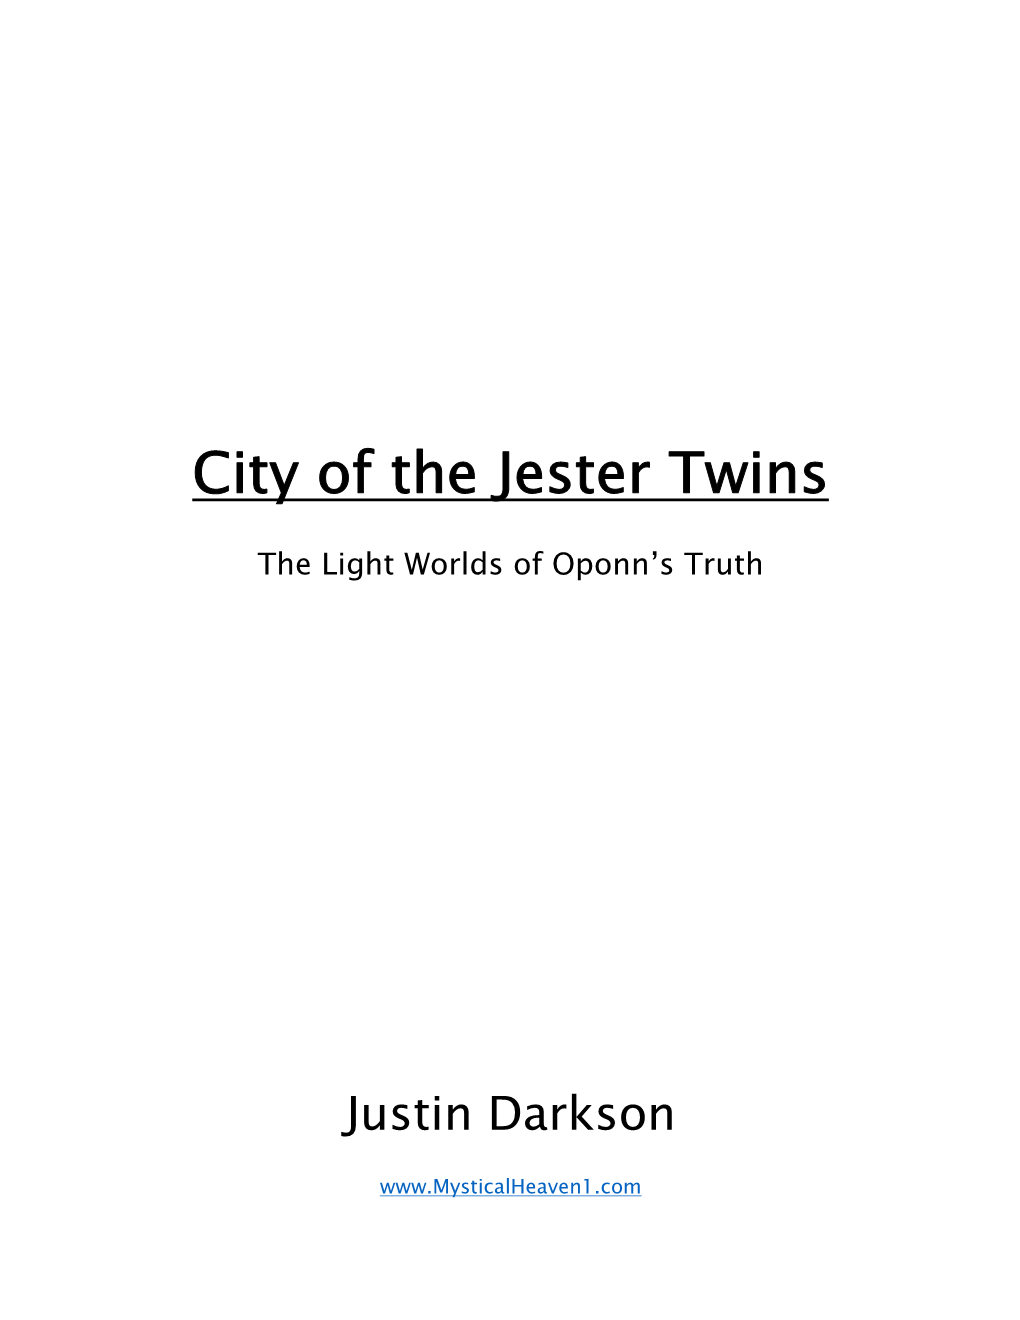 City of the Jester Twins